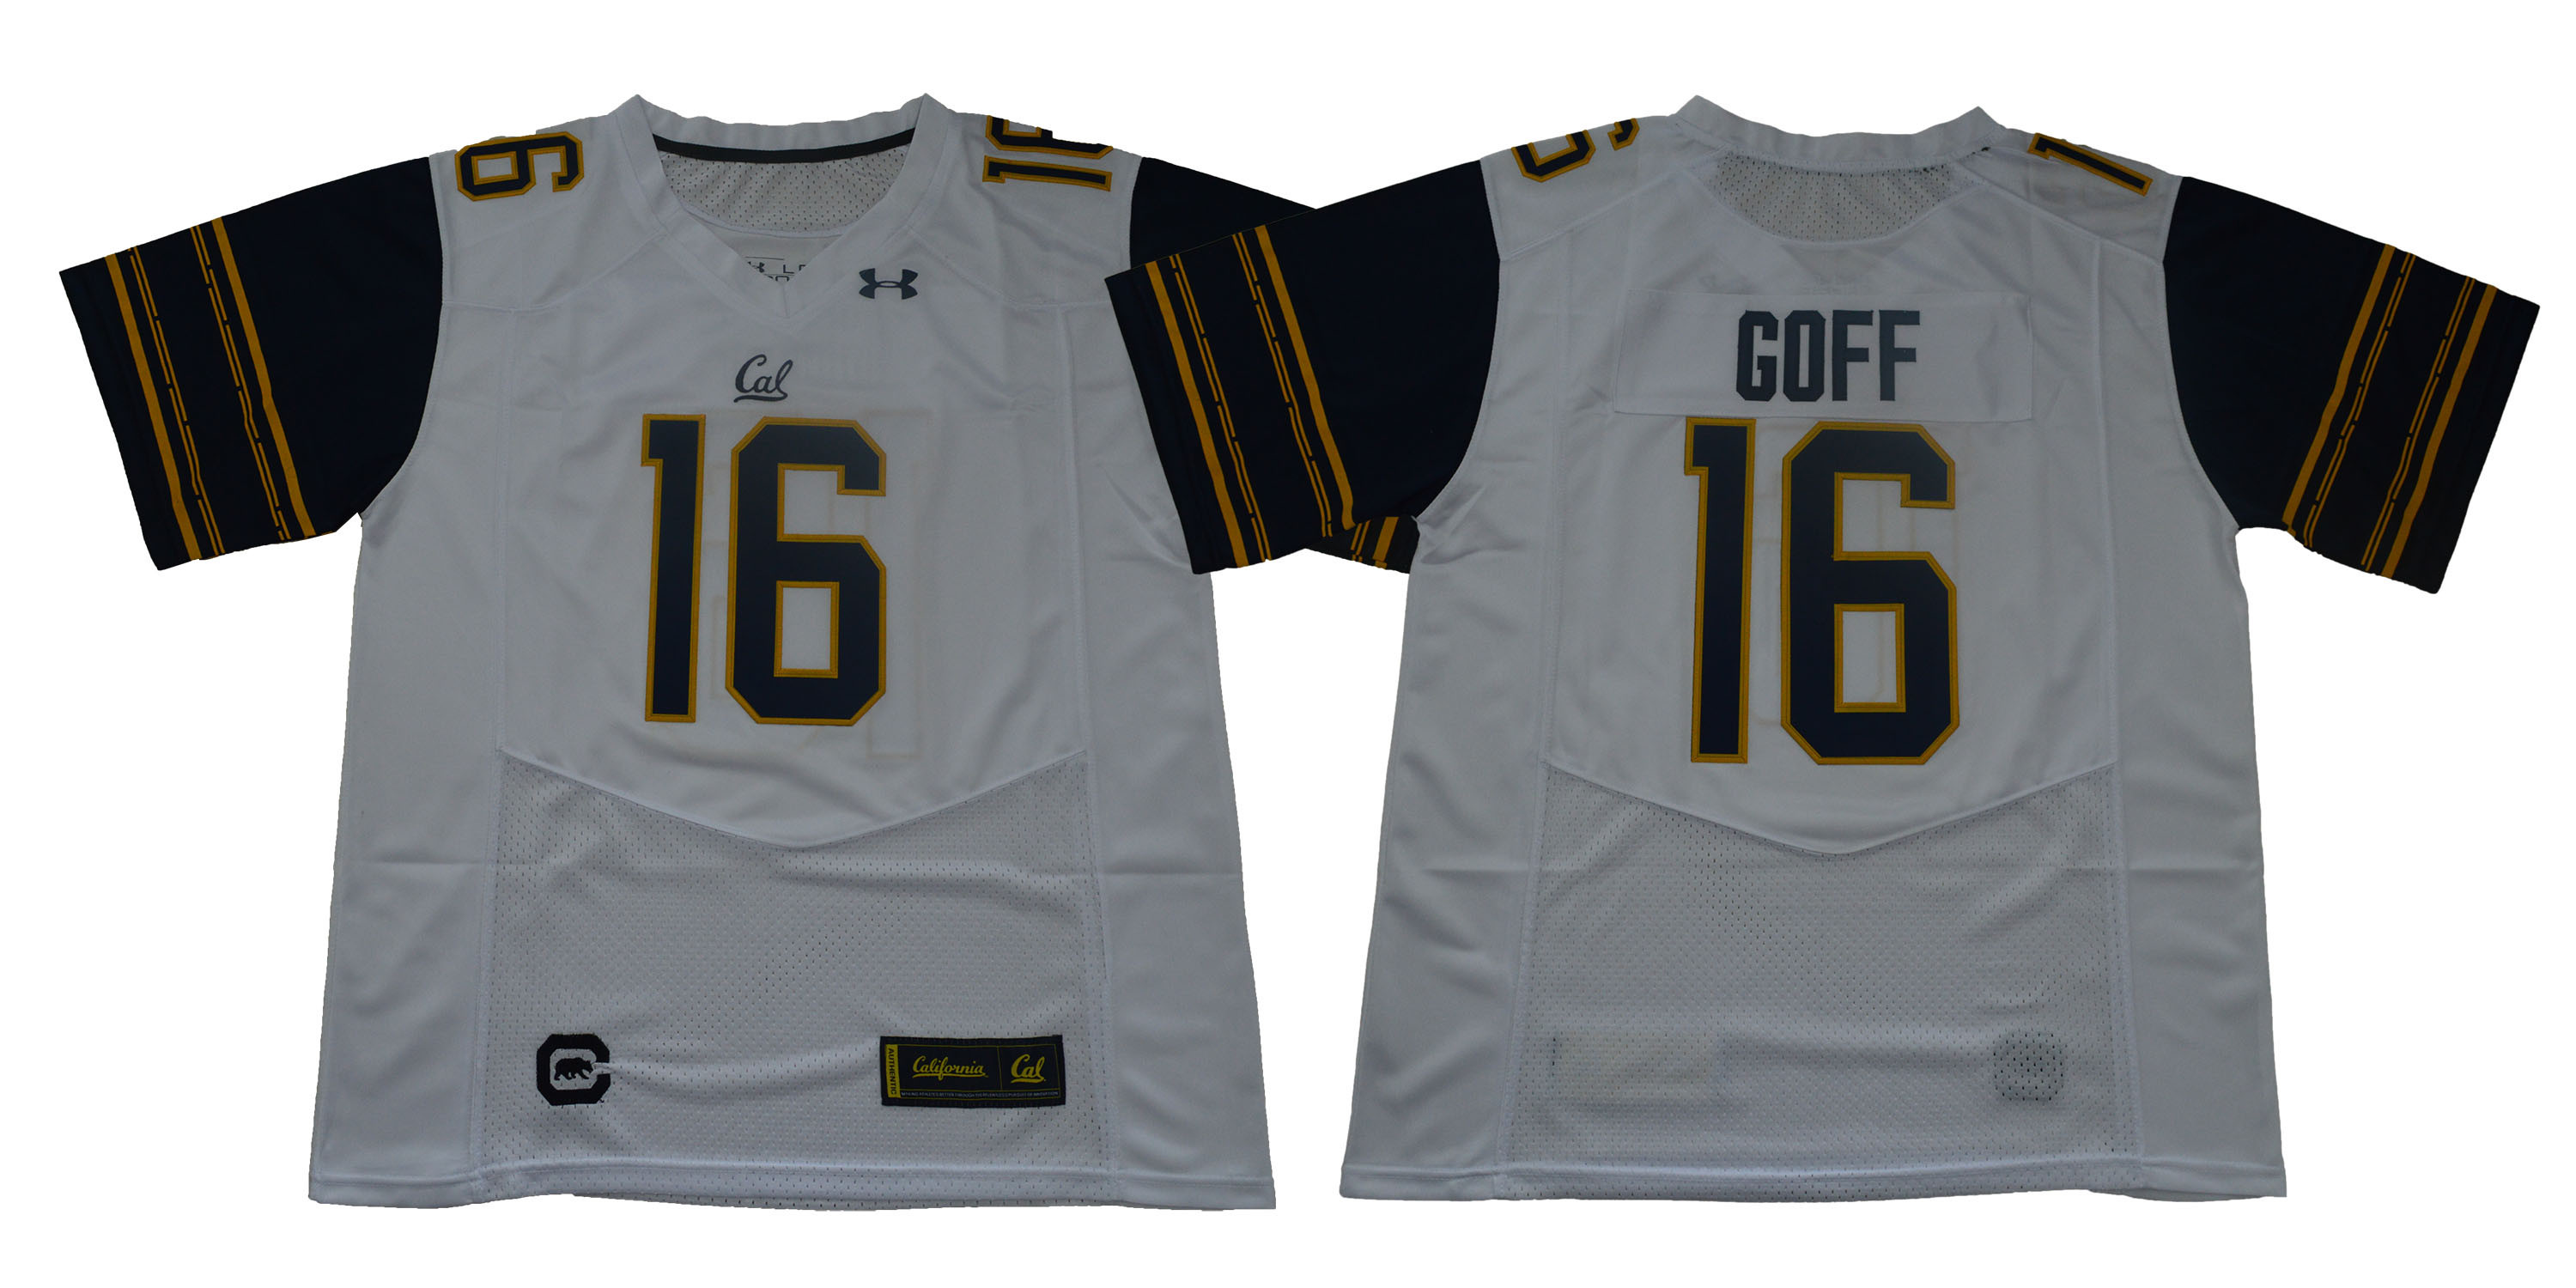 California Golden Bears 16 Jared Goff White College Football Jersey